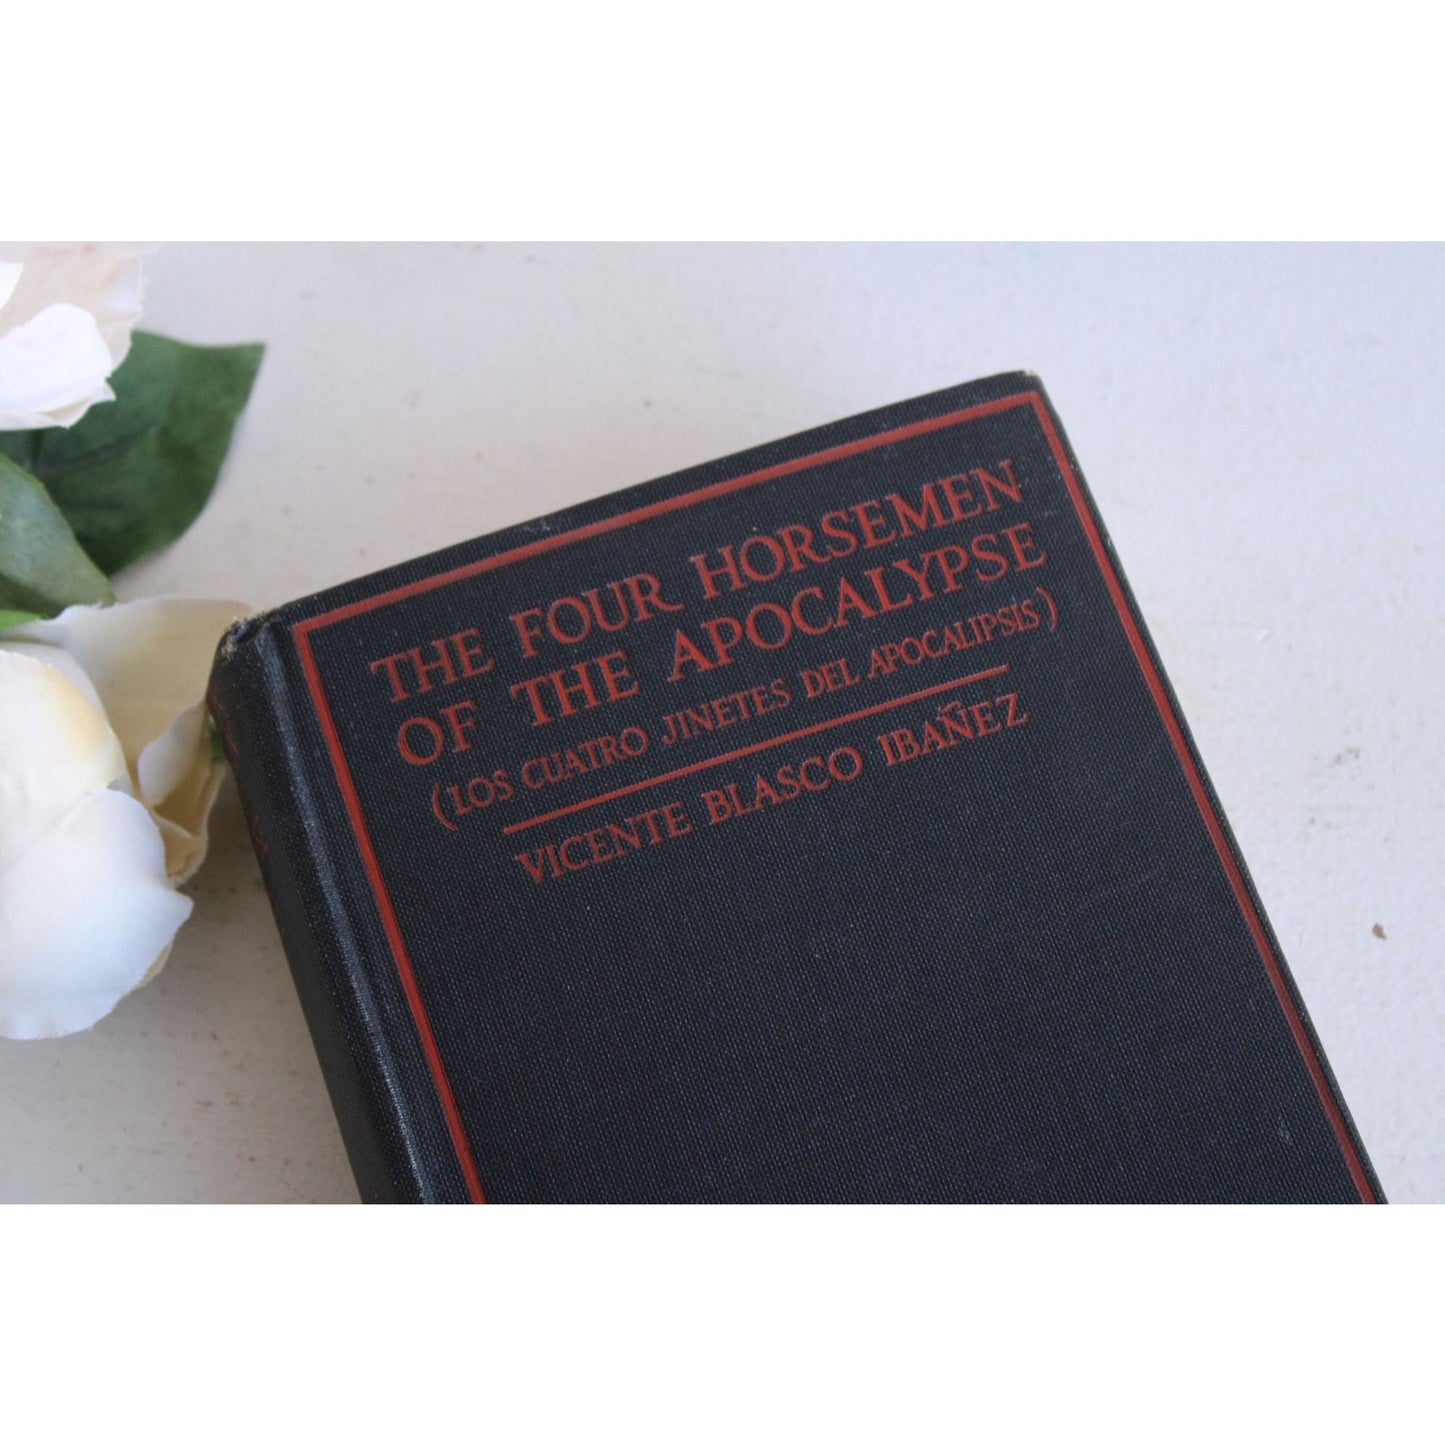 Vintage 1910s Book, Vicente Ibanez, "The Four Horsemen of the Apocalypse"